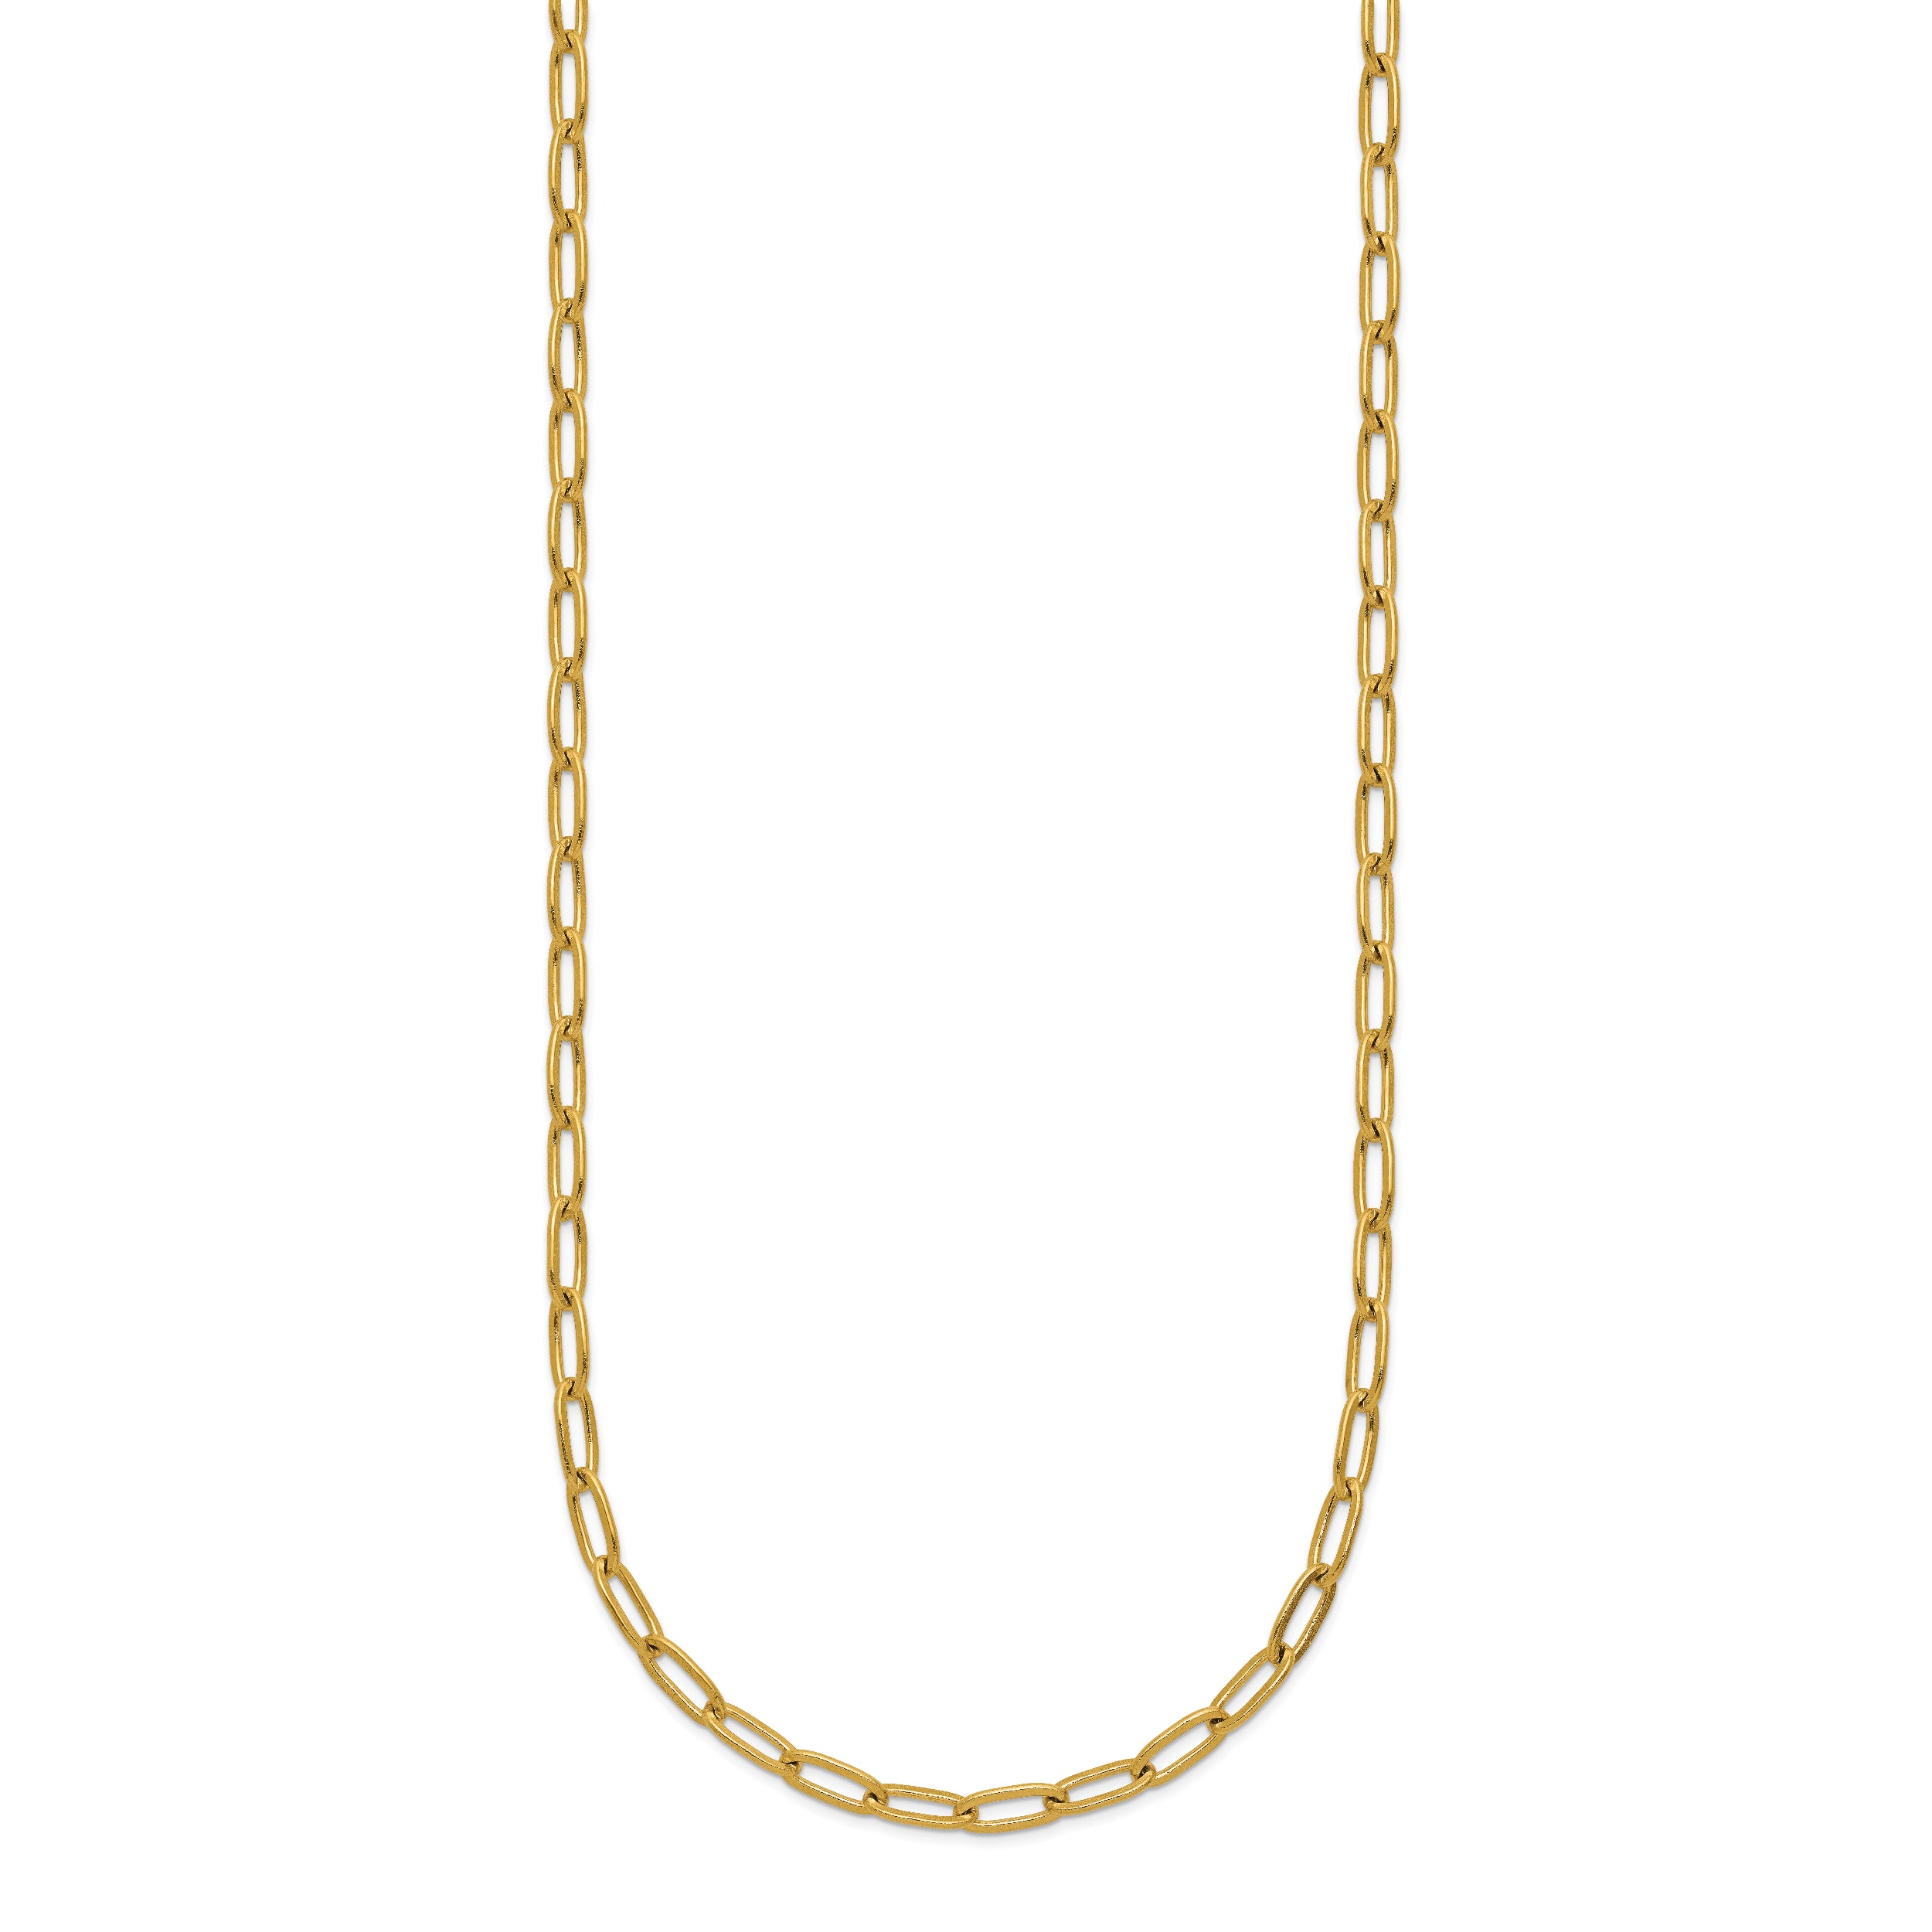 Chisel Stainless Steel Polished Yellow IP-plated Elongated Open Link Paperclip 15 inch Necklace with 2 inch Extension